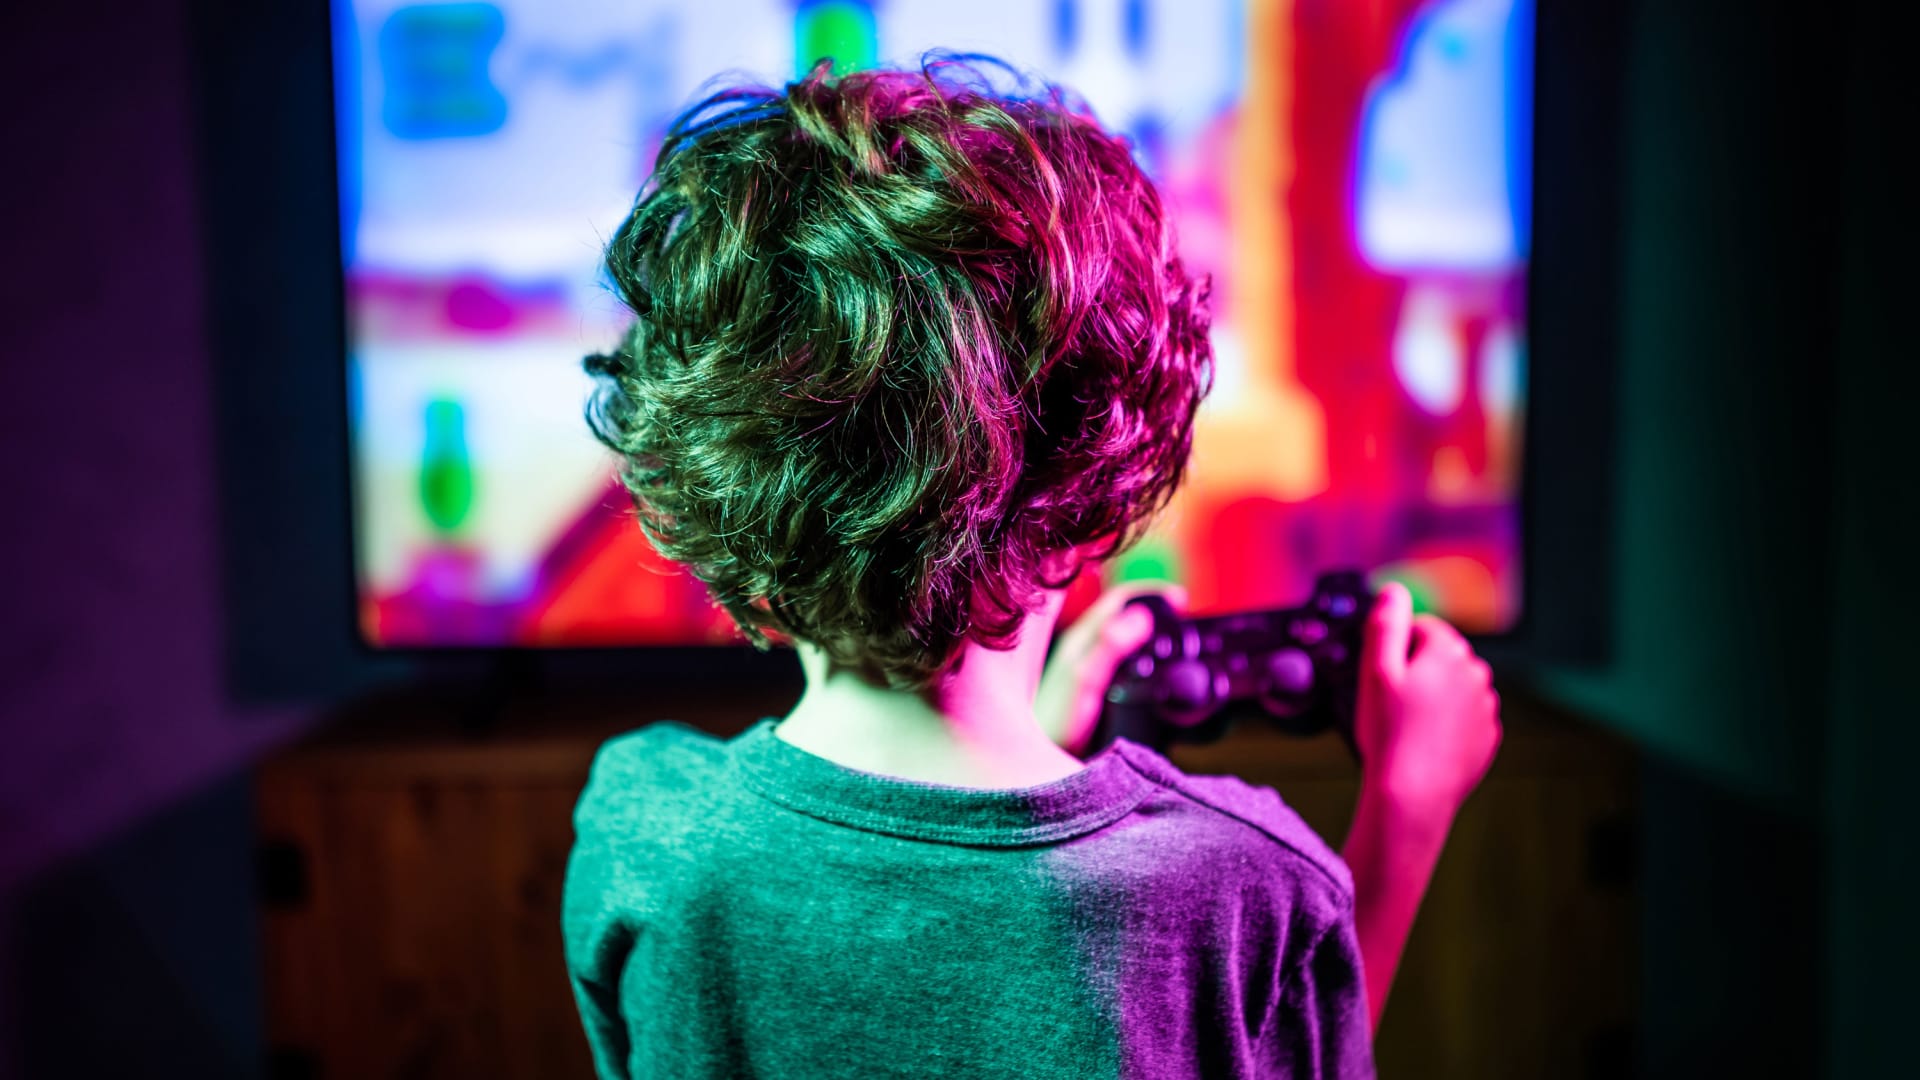 Do Video Games Make Kids Smarter? A New Study Says Yes